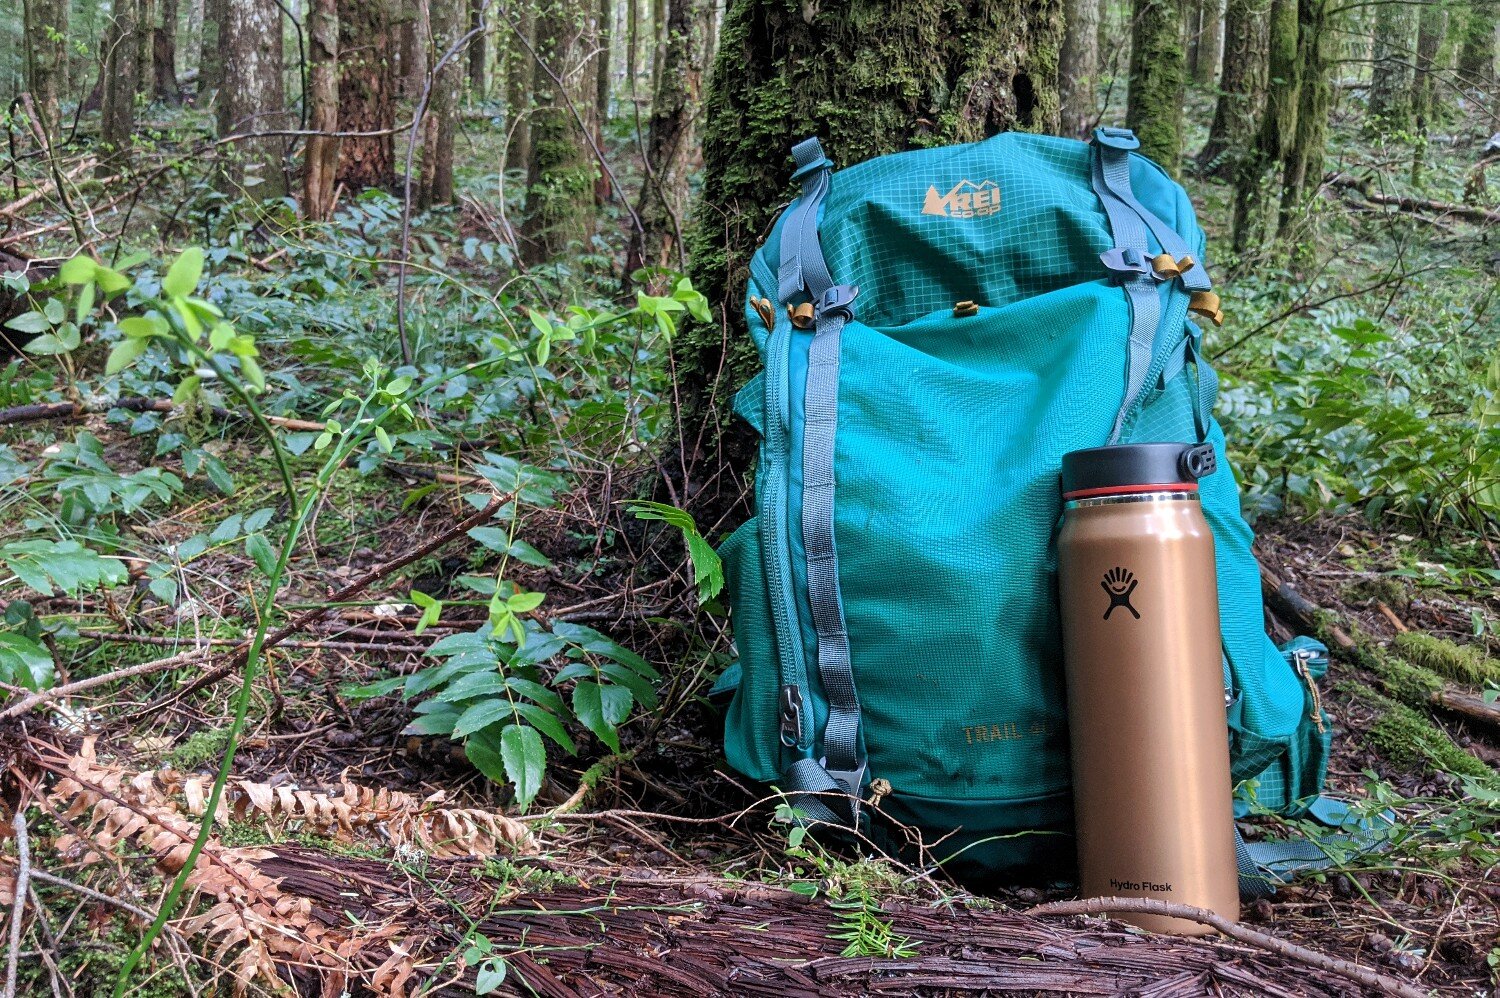 The Hydro Flask Lightweight Trail Series Bottles are Light enough to take on dayhikes and short backpacking trips.